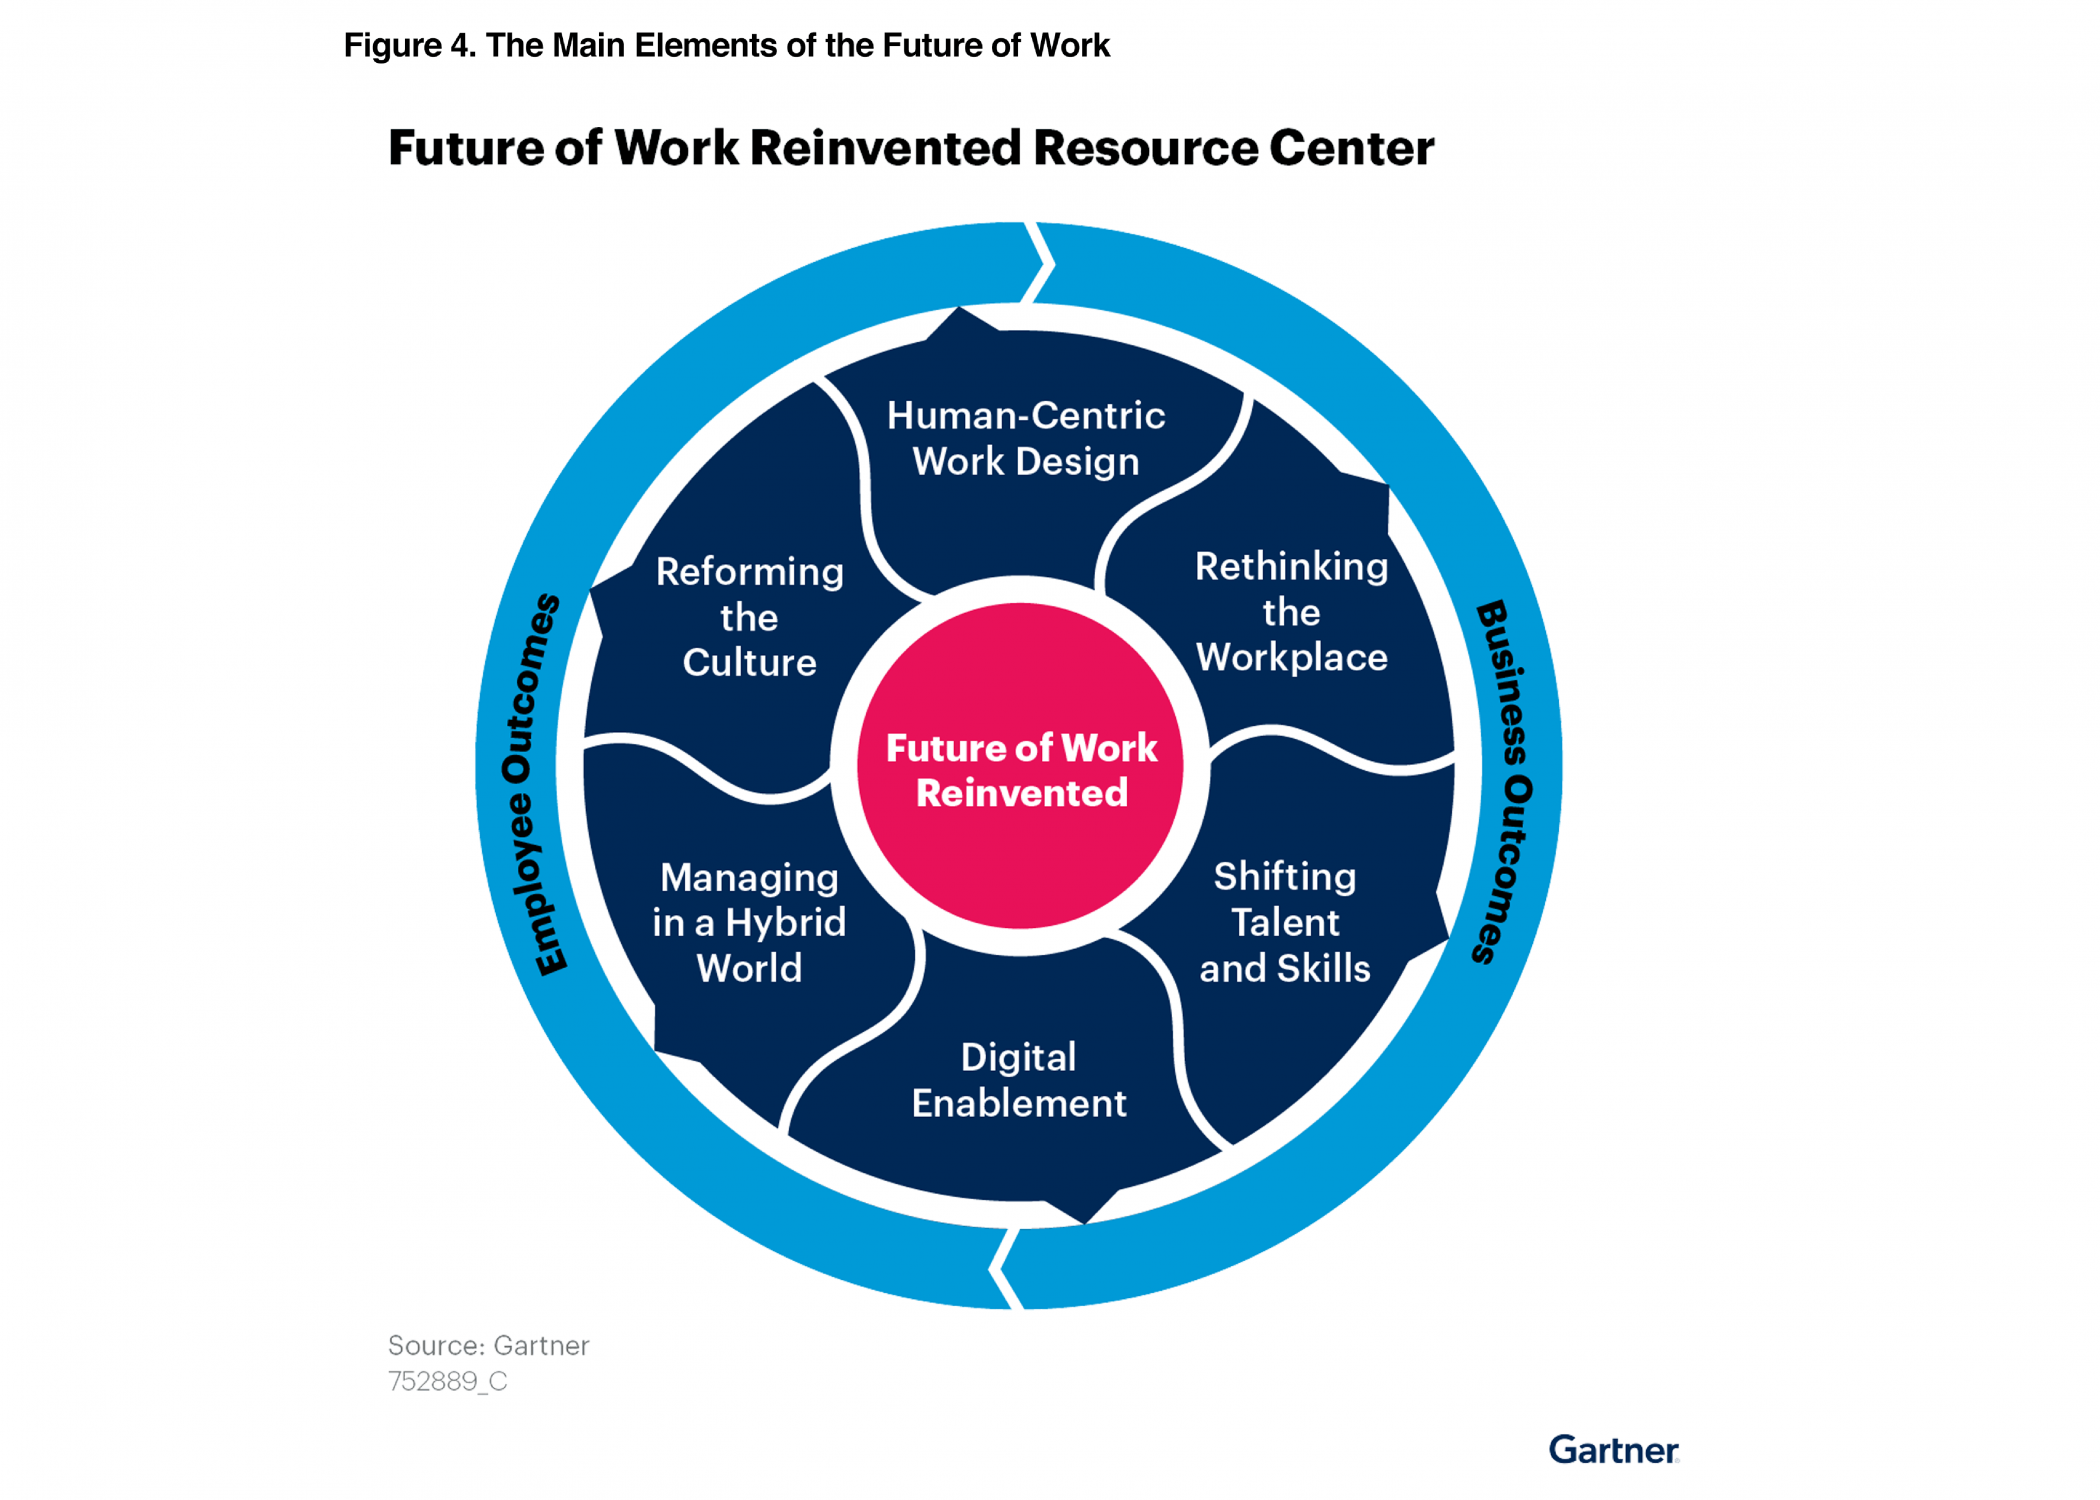 Gartner Report: Deliver Digital Workplace Programs With Service Providers That Focus on Experience